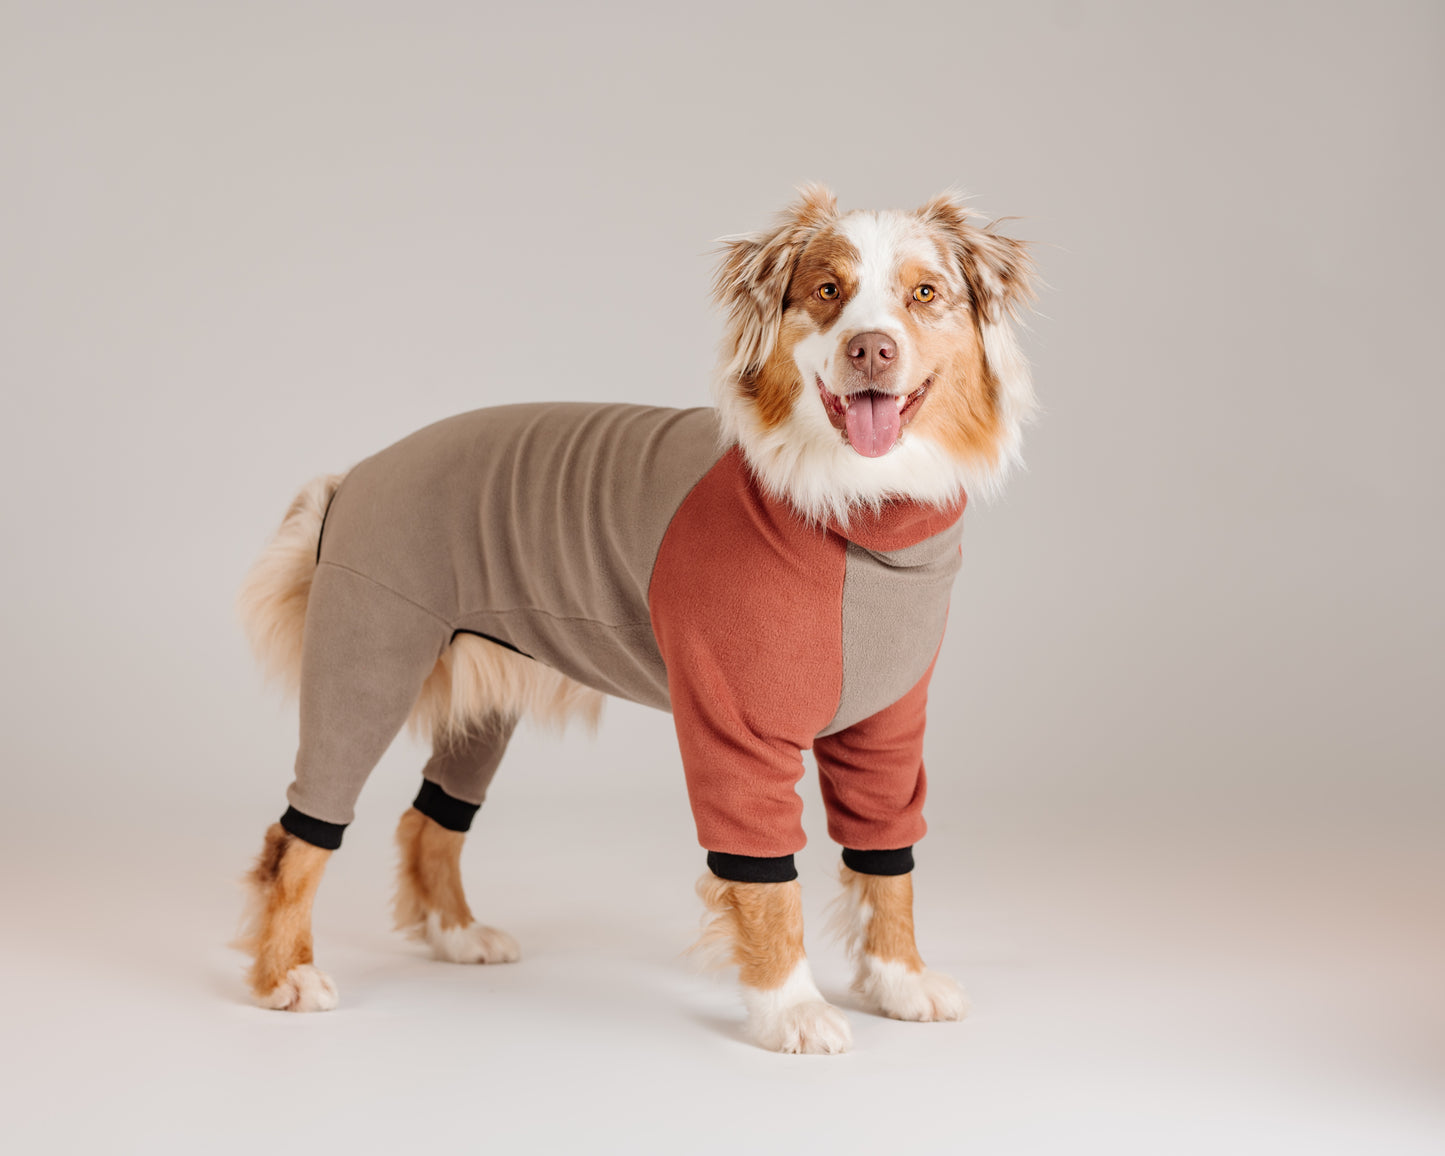 Made to measure 4 legs sweater fleece for cats or dogs.